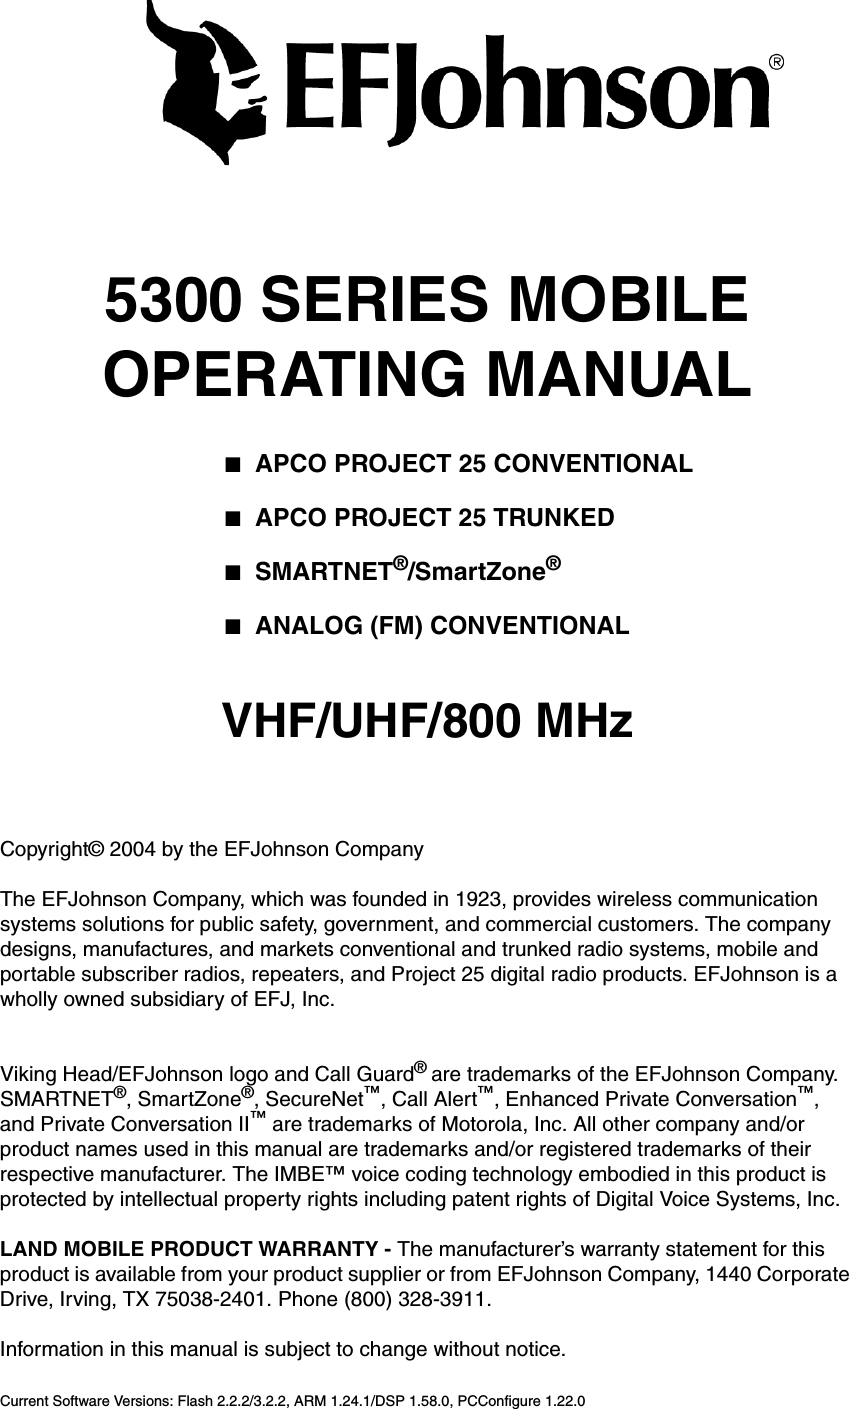 5300 SERIES MOBILEOPERATING MANUAL■APCO PROJECT 25 CONVENTIONAL■APCO PROJECT 25 TRUNKED■SMARTNET®/SmartZone®■ANALOG (FM) CONVENTIONALVHF/UHF/800 MHzCopyright© 2004 by the EFJohnson CompanyThe EFJohnson Company, which was founded in 1923, provides wireless communication systems solutions for public safety, government, and commercial customers. The company designs, manufactures, and markets conventional and trunked radio systems, mobile and portable subscriber radios, repeaters, and Project 25 digital radio products. EFJohnson is a wholly owned subsidiary of EFJ, Inc.Viking Head/EFJohnson logo and Call Guard® are trademarks of the EFJohnson Company. SMARTNET®, SmartZone®, SecureNet™, Call Alert™, Enhanced Private Conversation™, and Private Conversation II™ are trademarks of Motorola, Inc. All other company and/or product names used in this manual are trademarks and/or registered trademarks of their respective manufacturer. The IMBE™ voice coding technology embodied in this product is protected by intellectual property rights including patent rights of Digital Voice Systems, Inc.LAND MOBILE PRODUCT WARRANTY - The manufacturer’s warranty statement for this product is available from your product supplier or from EFJohnson Company, 1440 Corporate Drive, Irving, TX 75038-2401. Phone (800) 328-3911.Information in this manual is subject to change without notice. Current Software Versions: Flash 2.2.2/3.2.2, ARM 1.24.1/DSP 1.58.0, PCConfigure 1.22.0